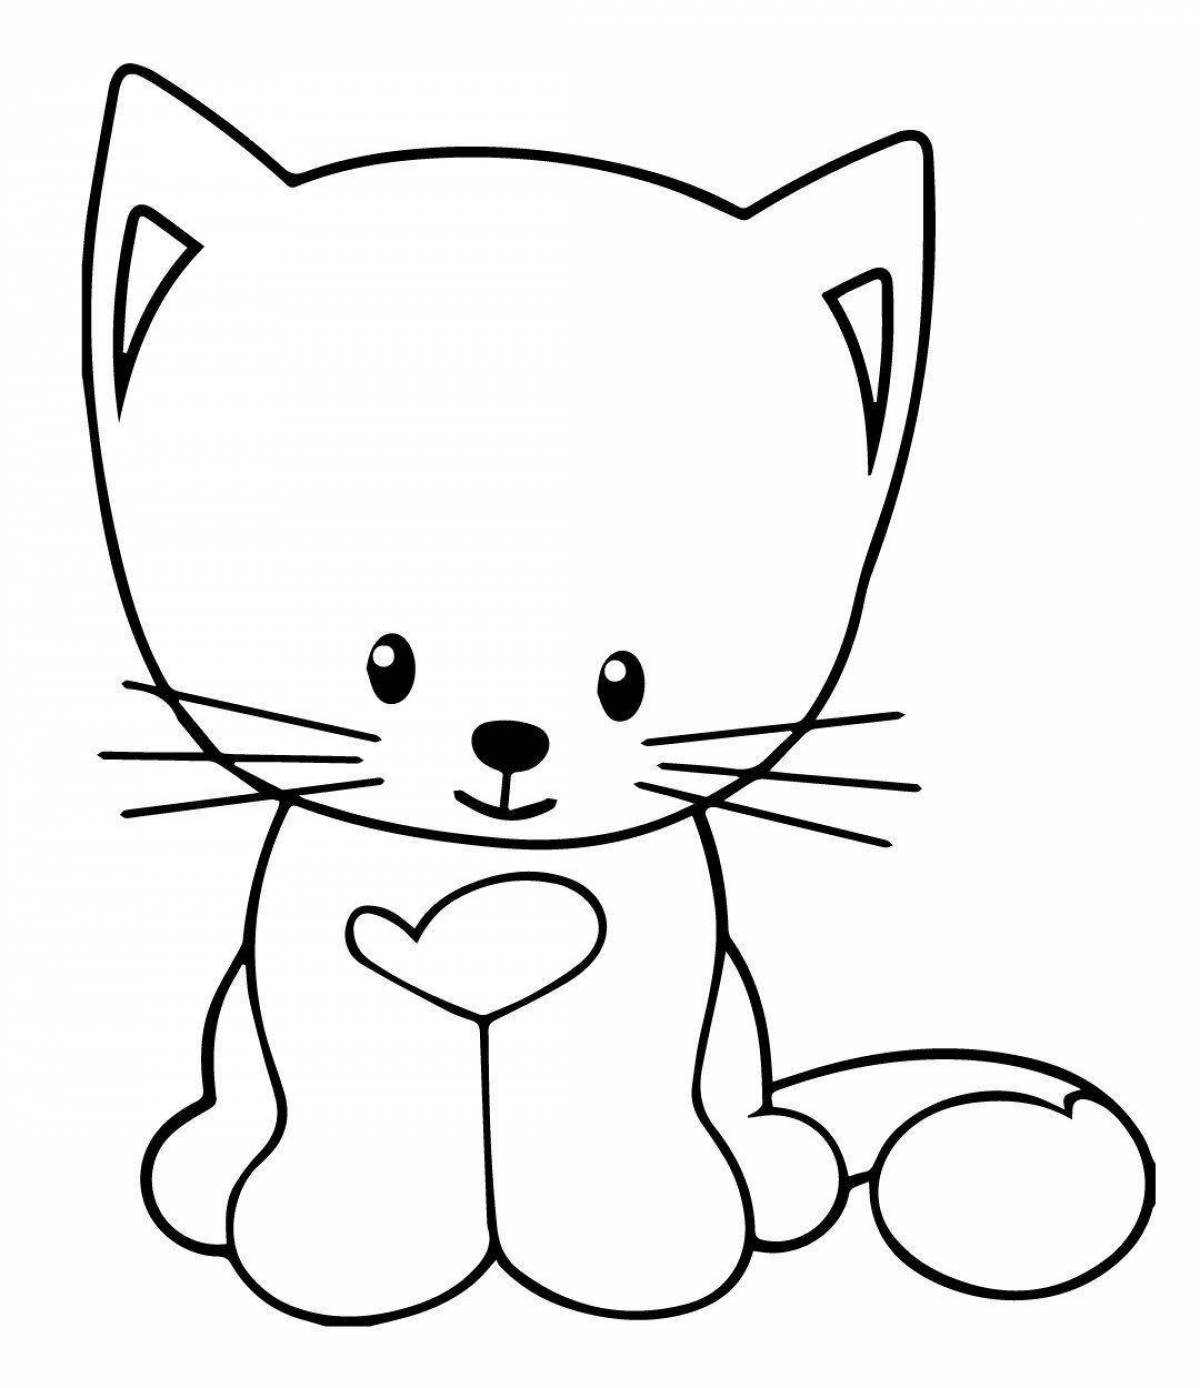 Fun kitty coloring book for 2-3 year olds